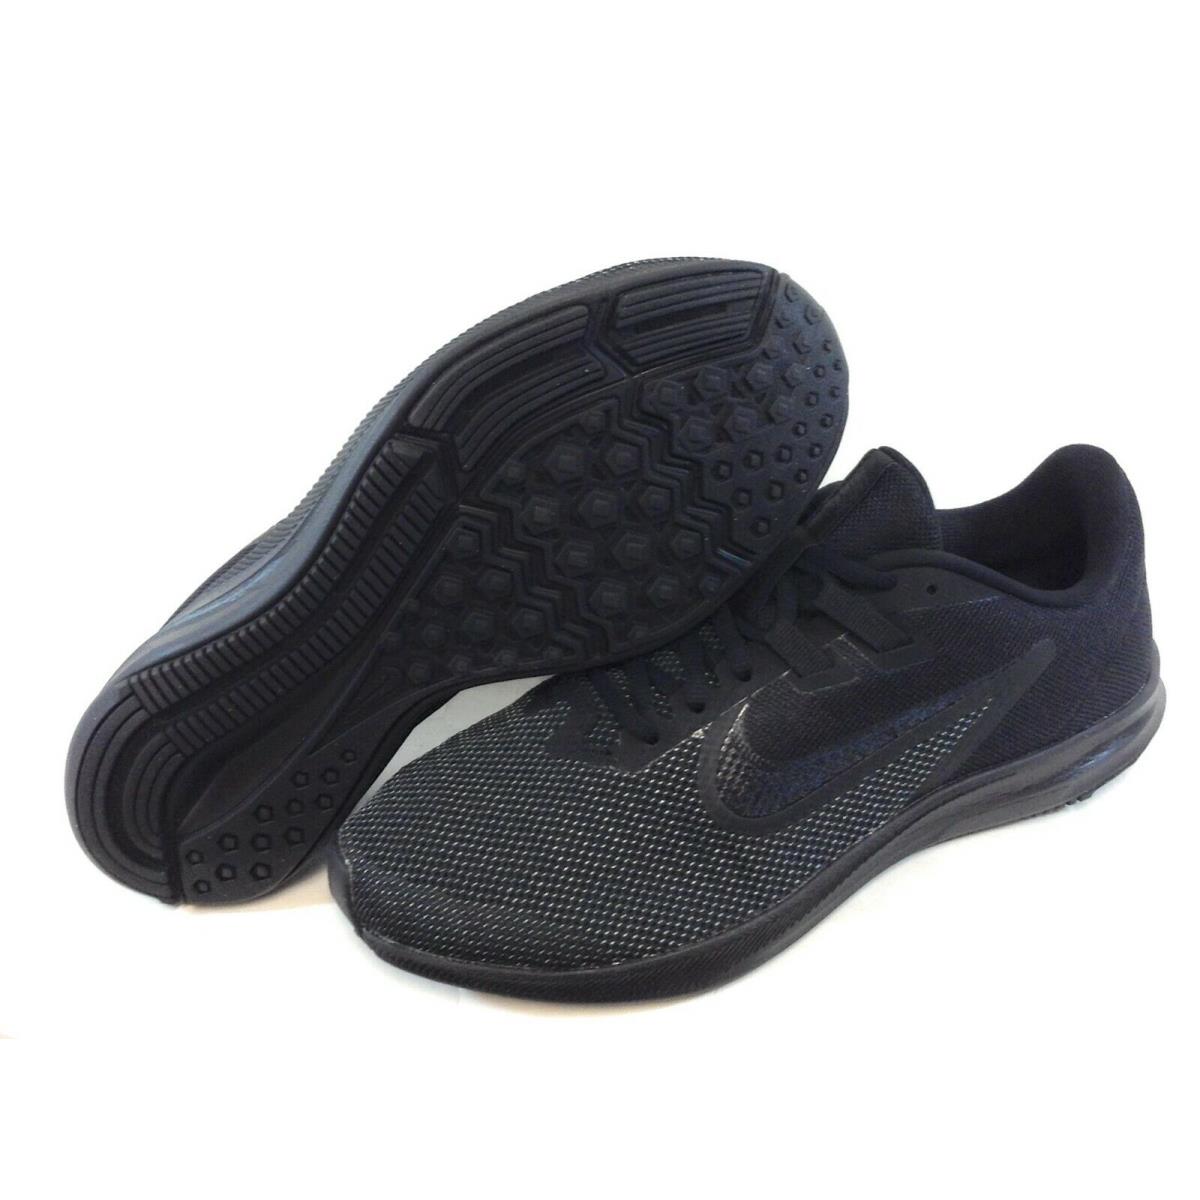 Mens Nike Downshifter 9 AR4946 002 Extra Wide Width 4E Black Sneakers Shoes